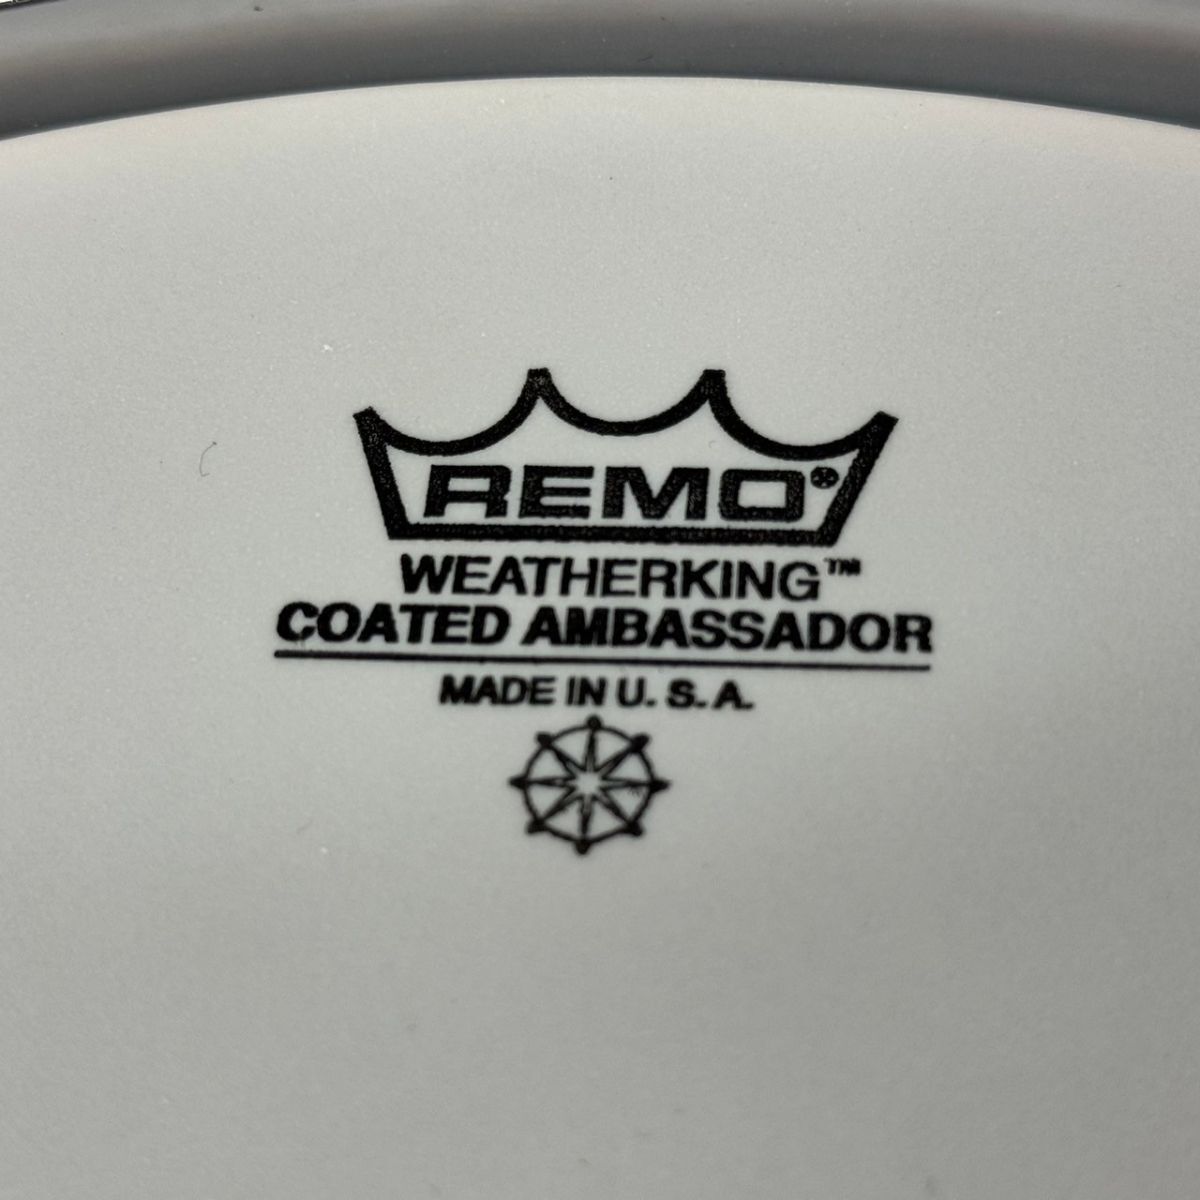 C853-K18-4968 Pearl パール スネアドラム 日本製 REMO WEATHER KING COATED AMBASSADOR made in USA ケース付き ②の画像8